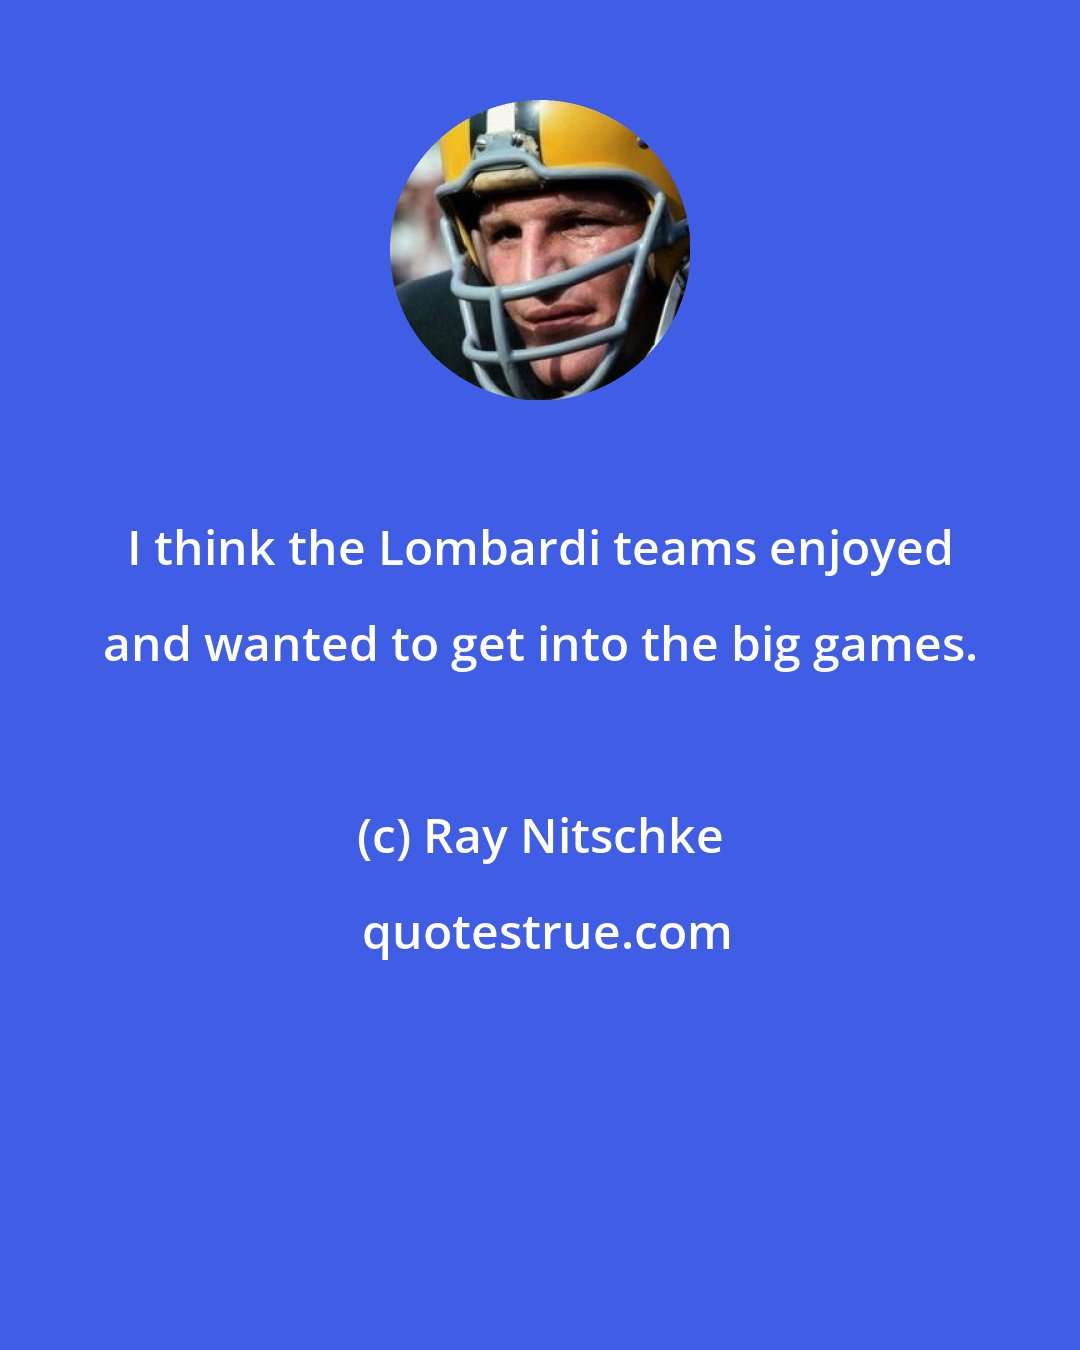 Ray Nitschke: I think the Lombardi teams enjoyed and wanted to get into the big games.